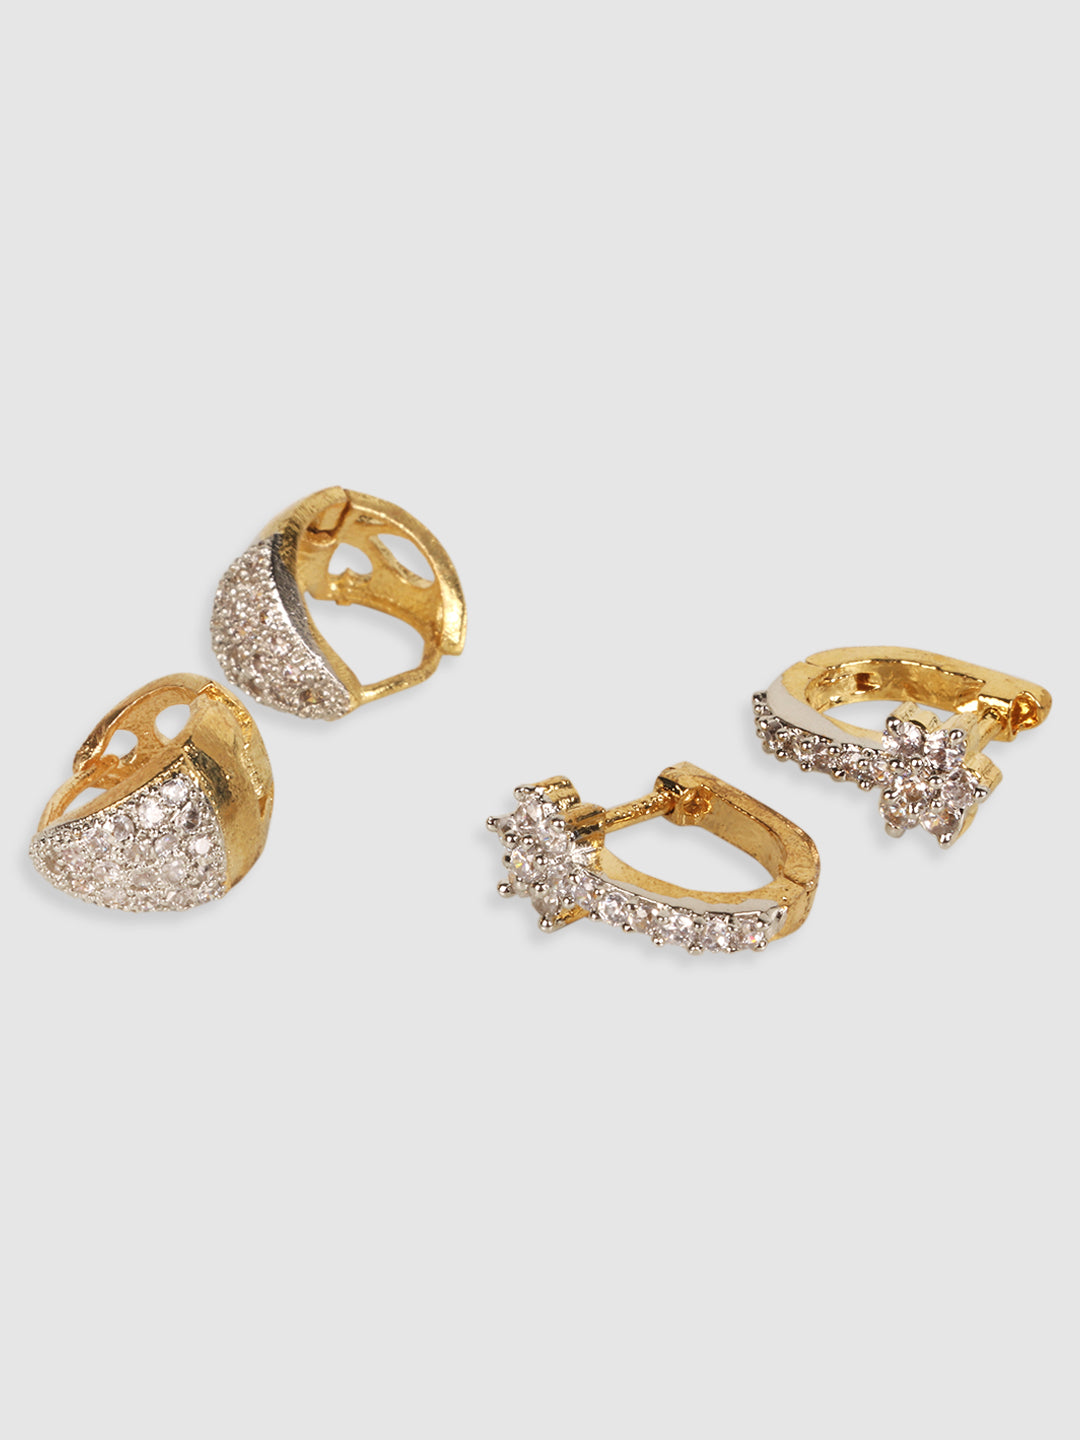 Set of 2 White & Gold-Plated Floral Hoop Earrings